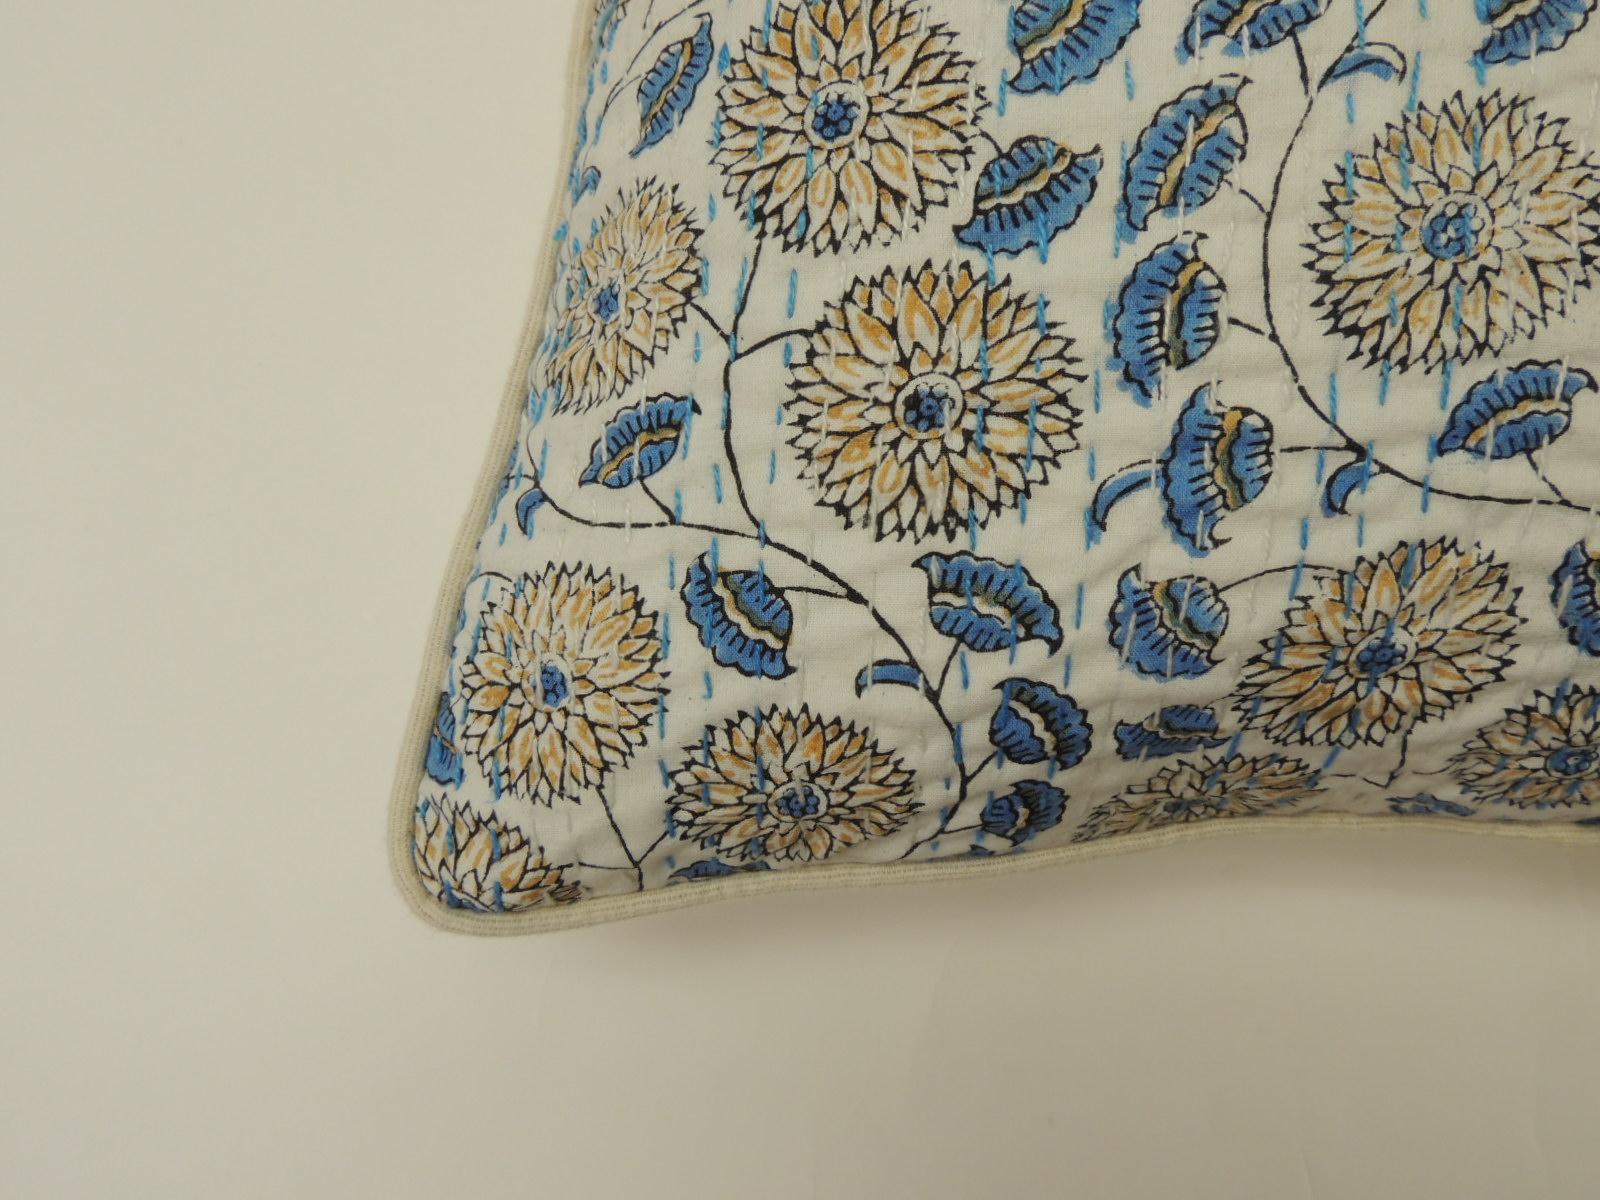 Pair of Indian quilted lotus in blue and yellow decorative pillows.
Vintage floral hand quilted Indian pillow in yellow, blue and natural. Natural linen backing and piping.
The price on the pillow includes a custom ATG feather/down insert.